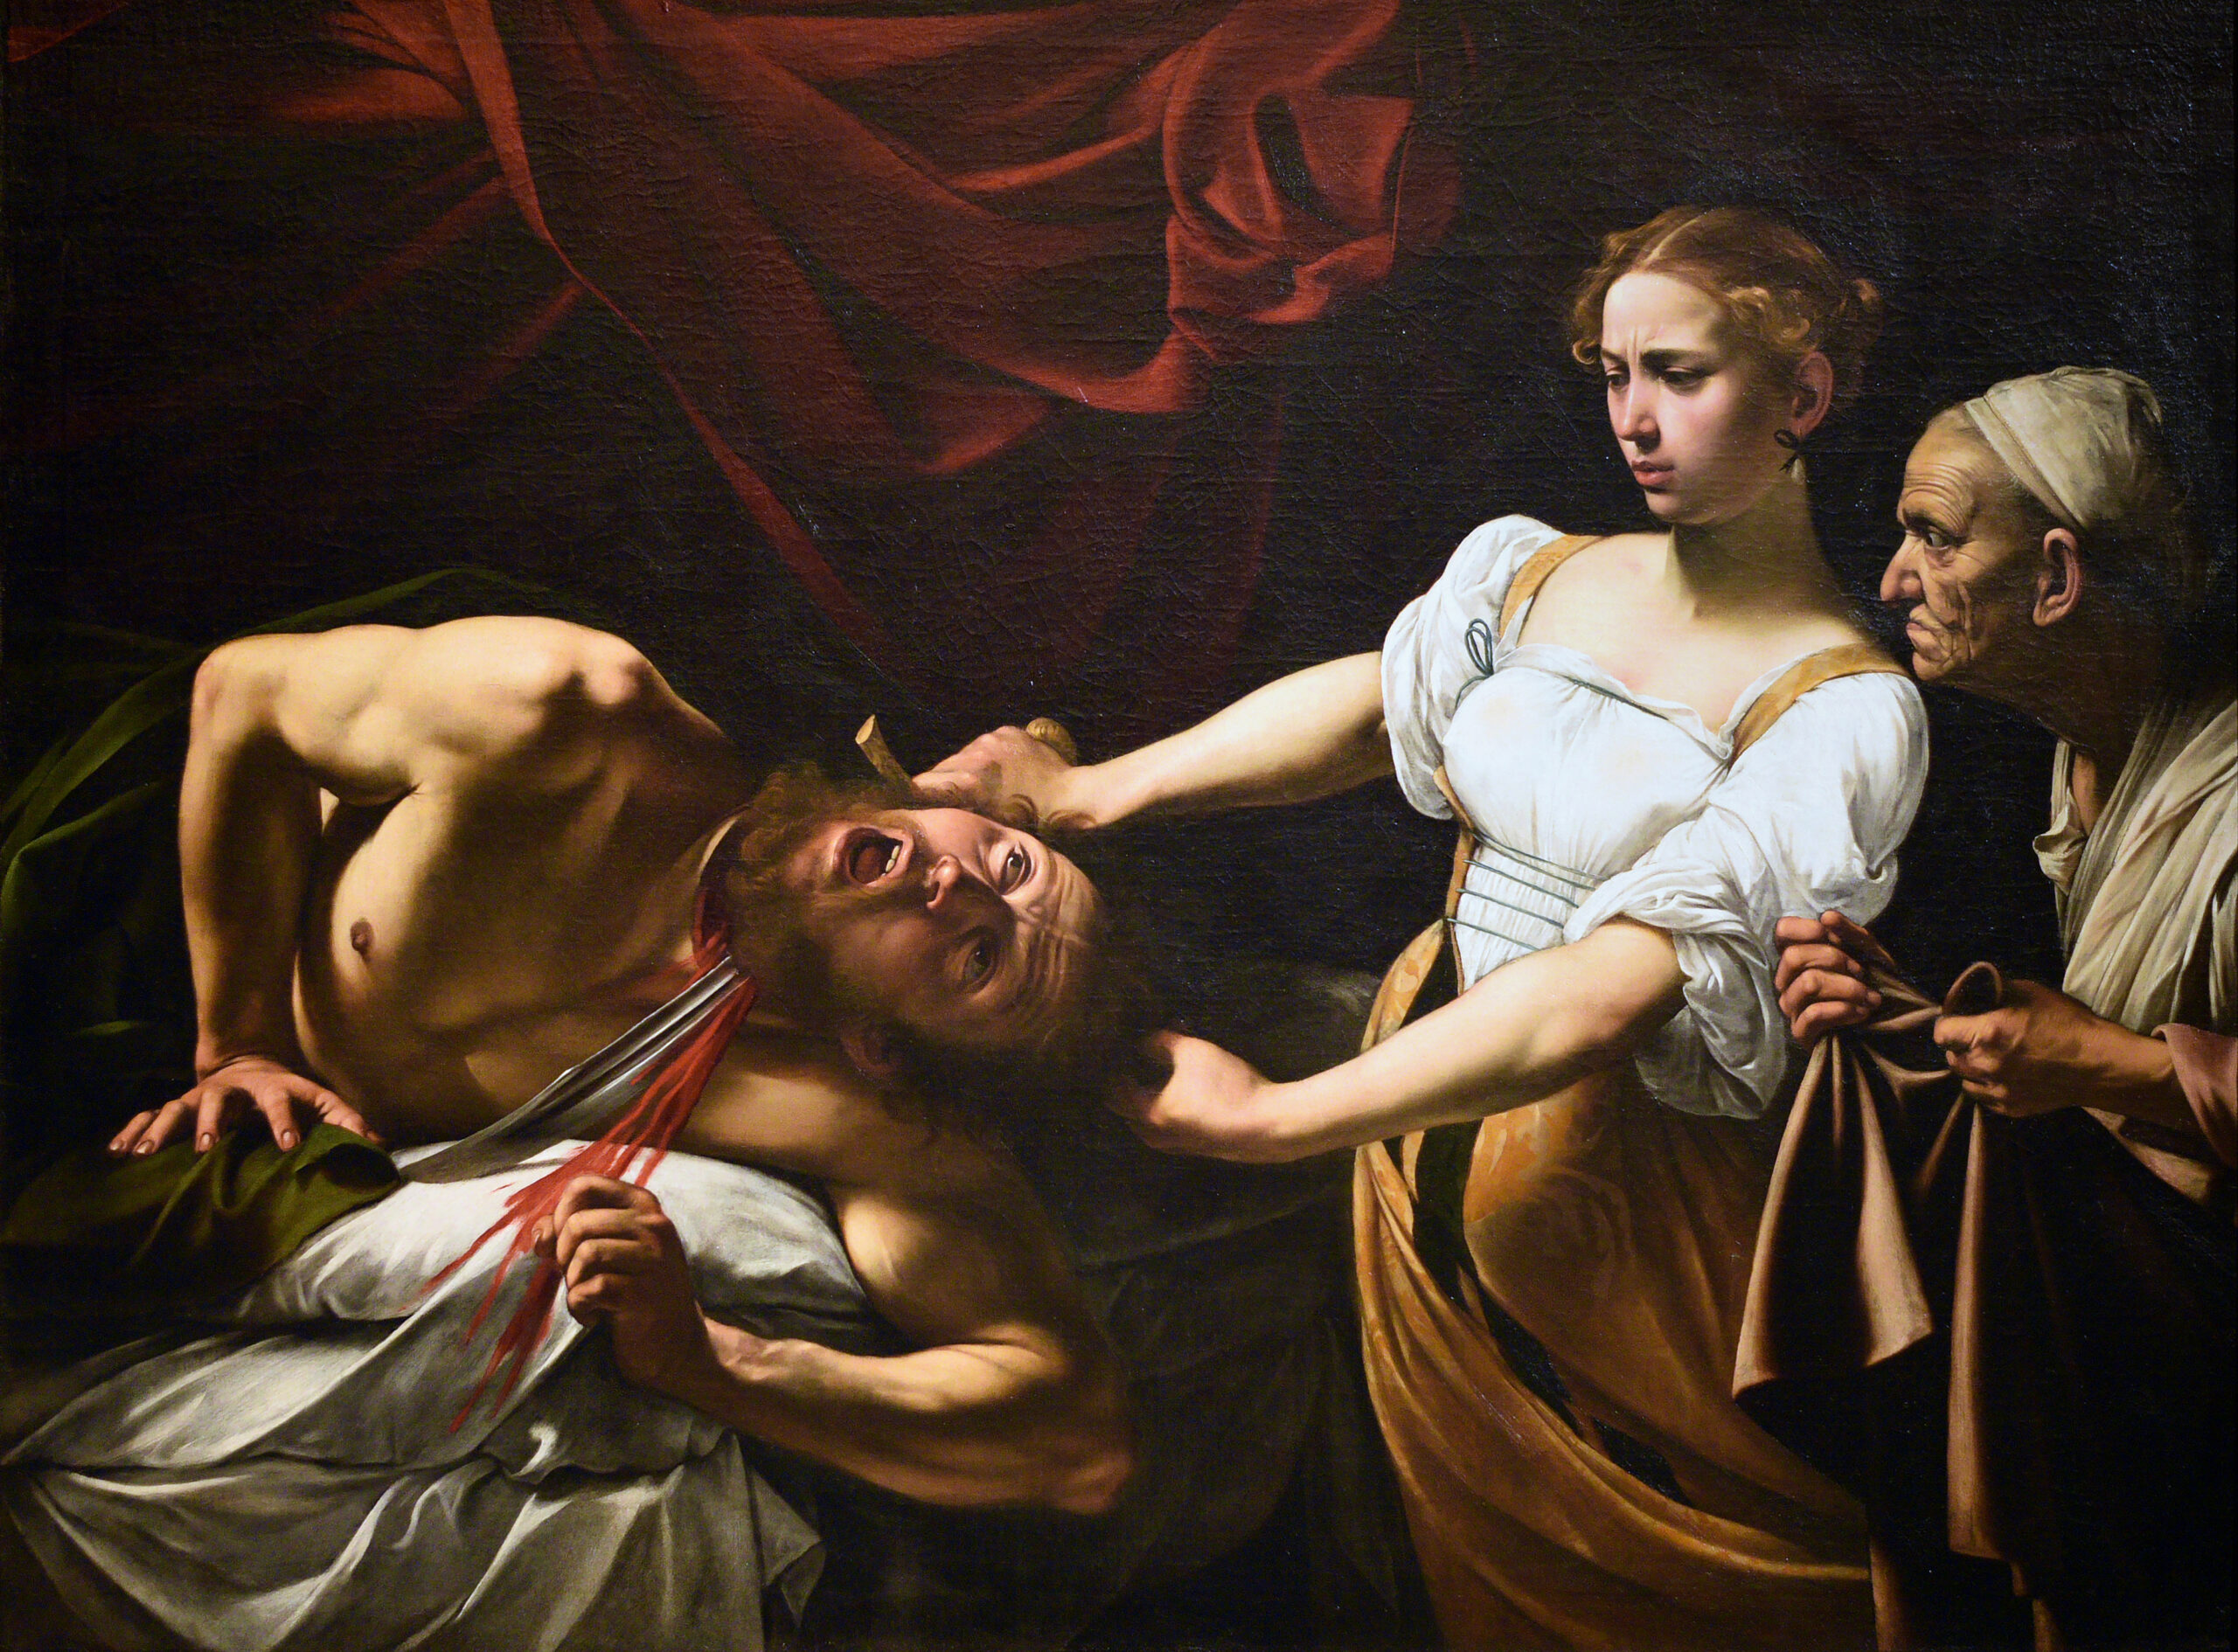 Renaissance painting of a young woman cutting off the head of man with a sword